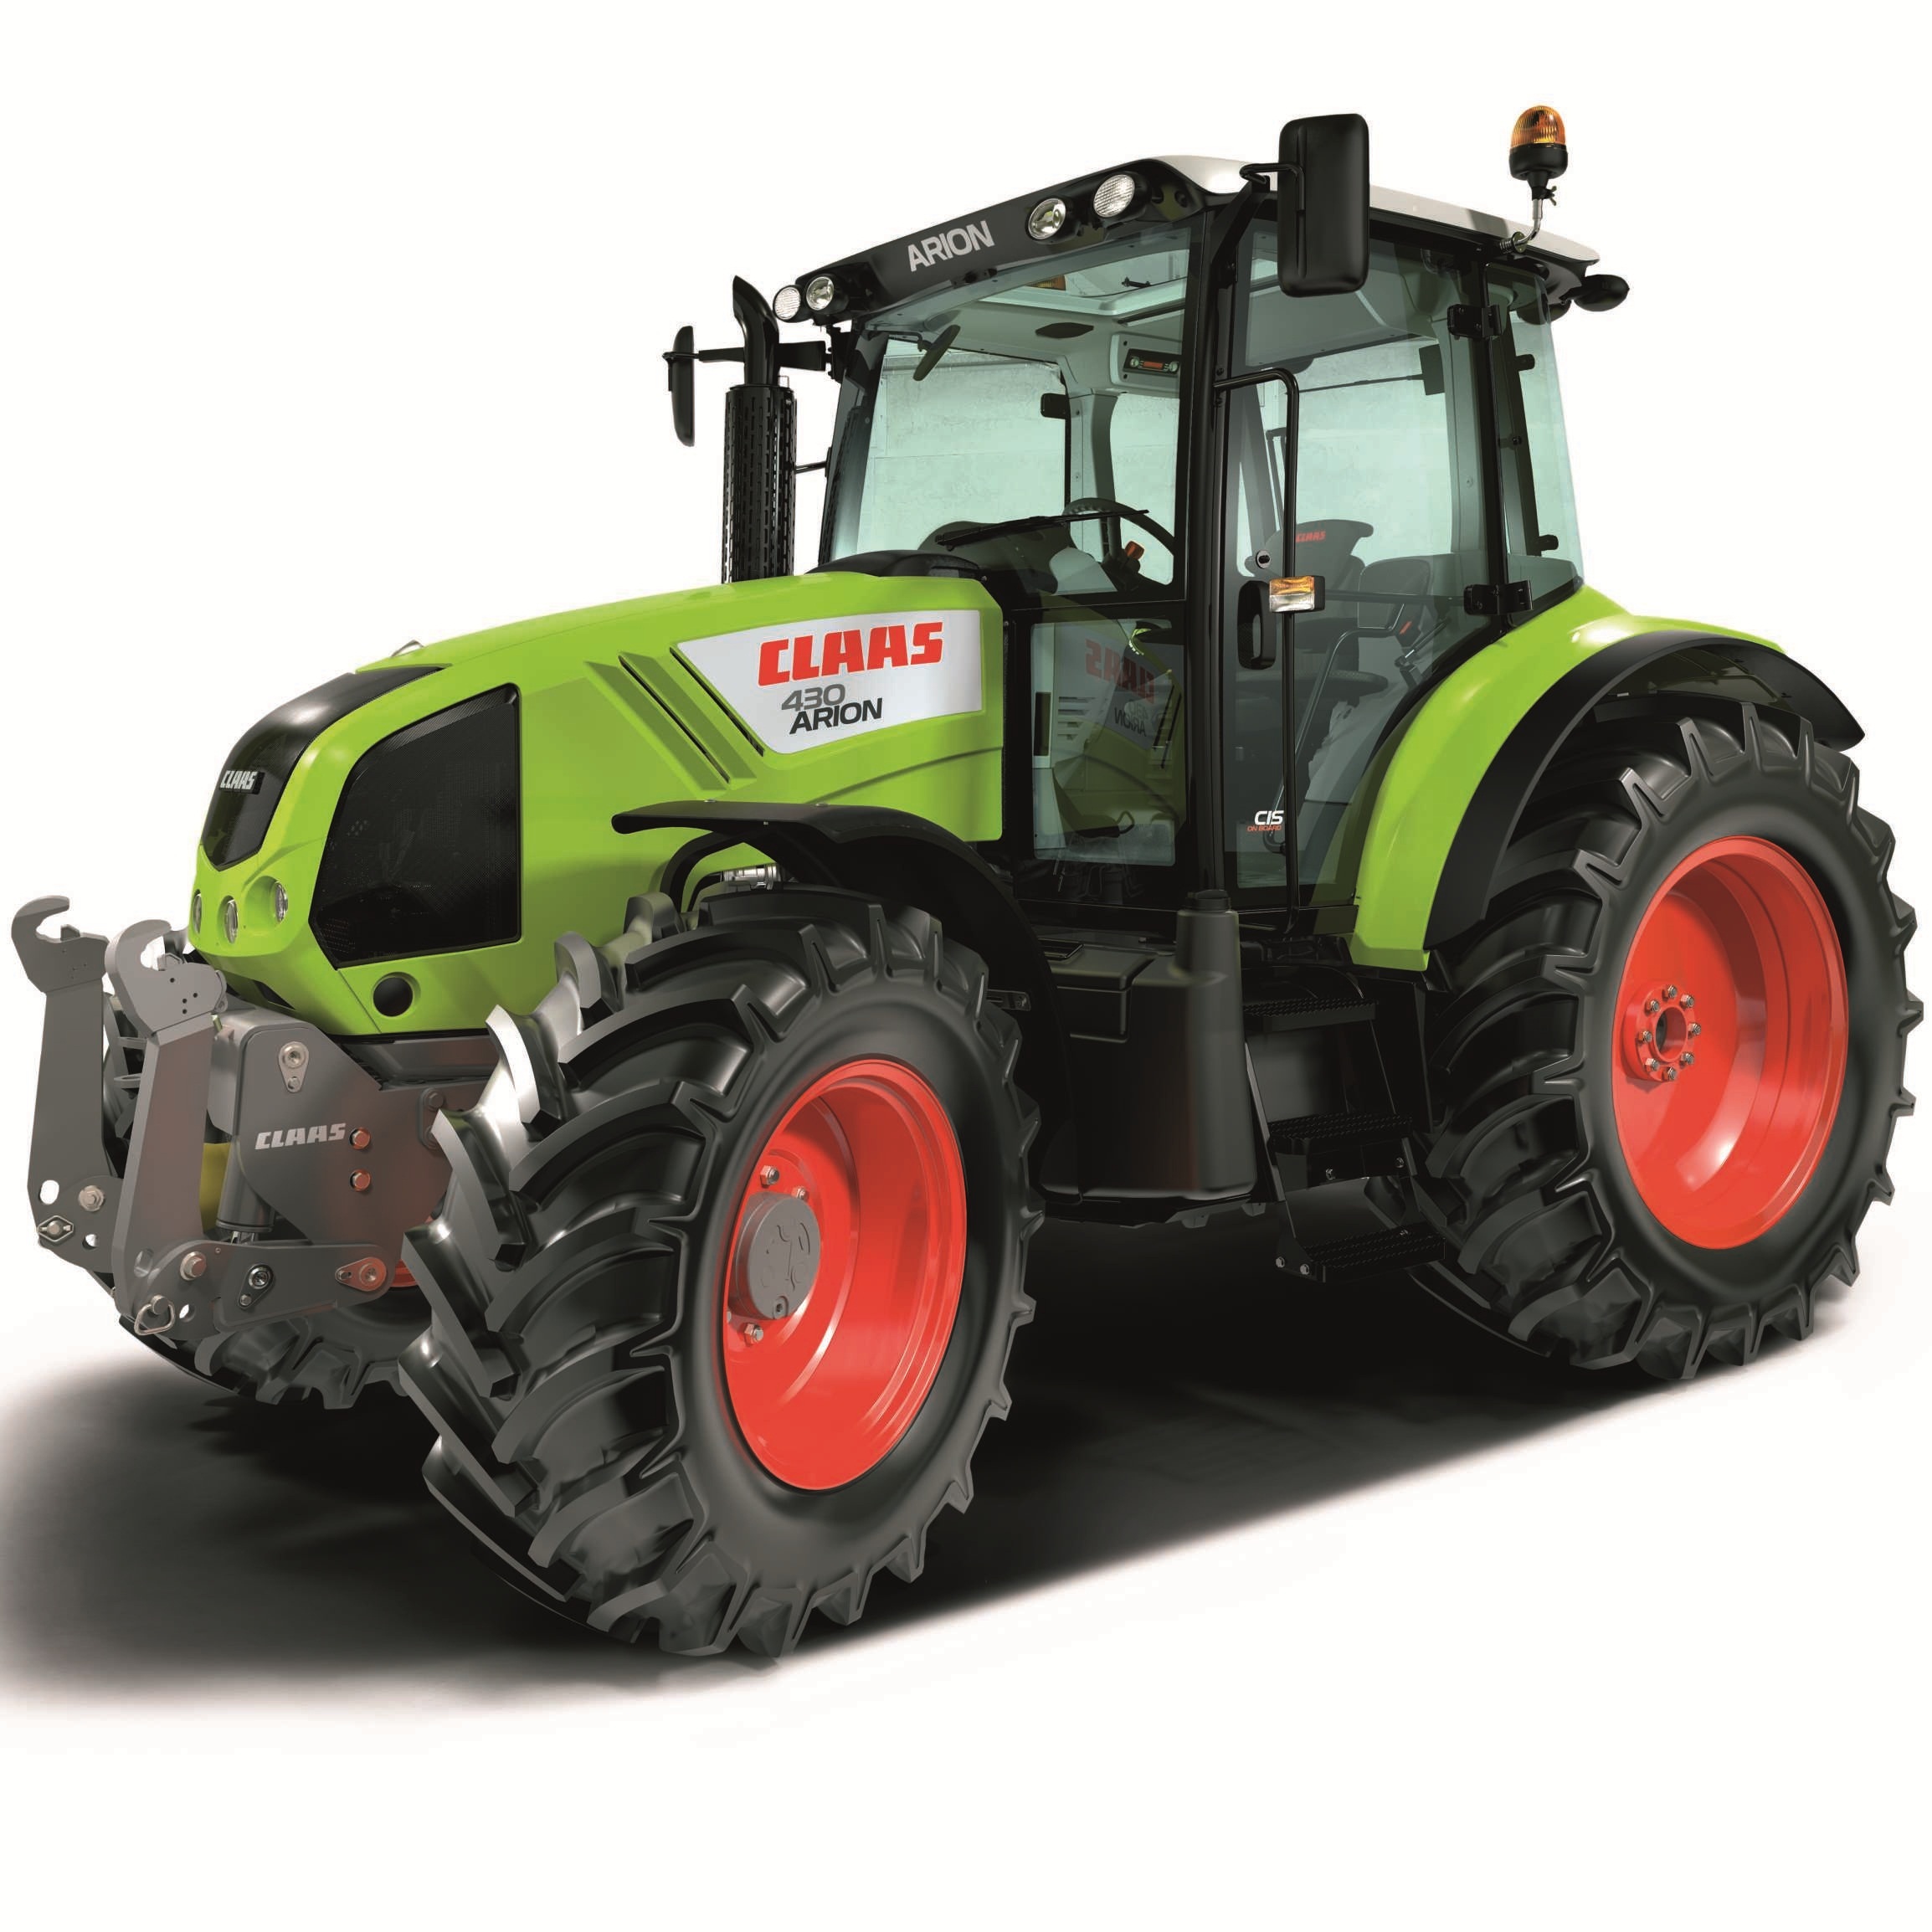 Fichiers Tuning Haute Qualité Claas Tractor Arion 410 4-4525 CR JD i-EGR 95hp